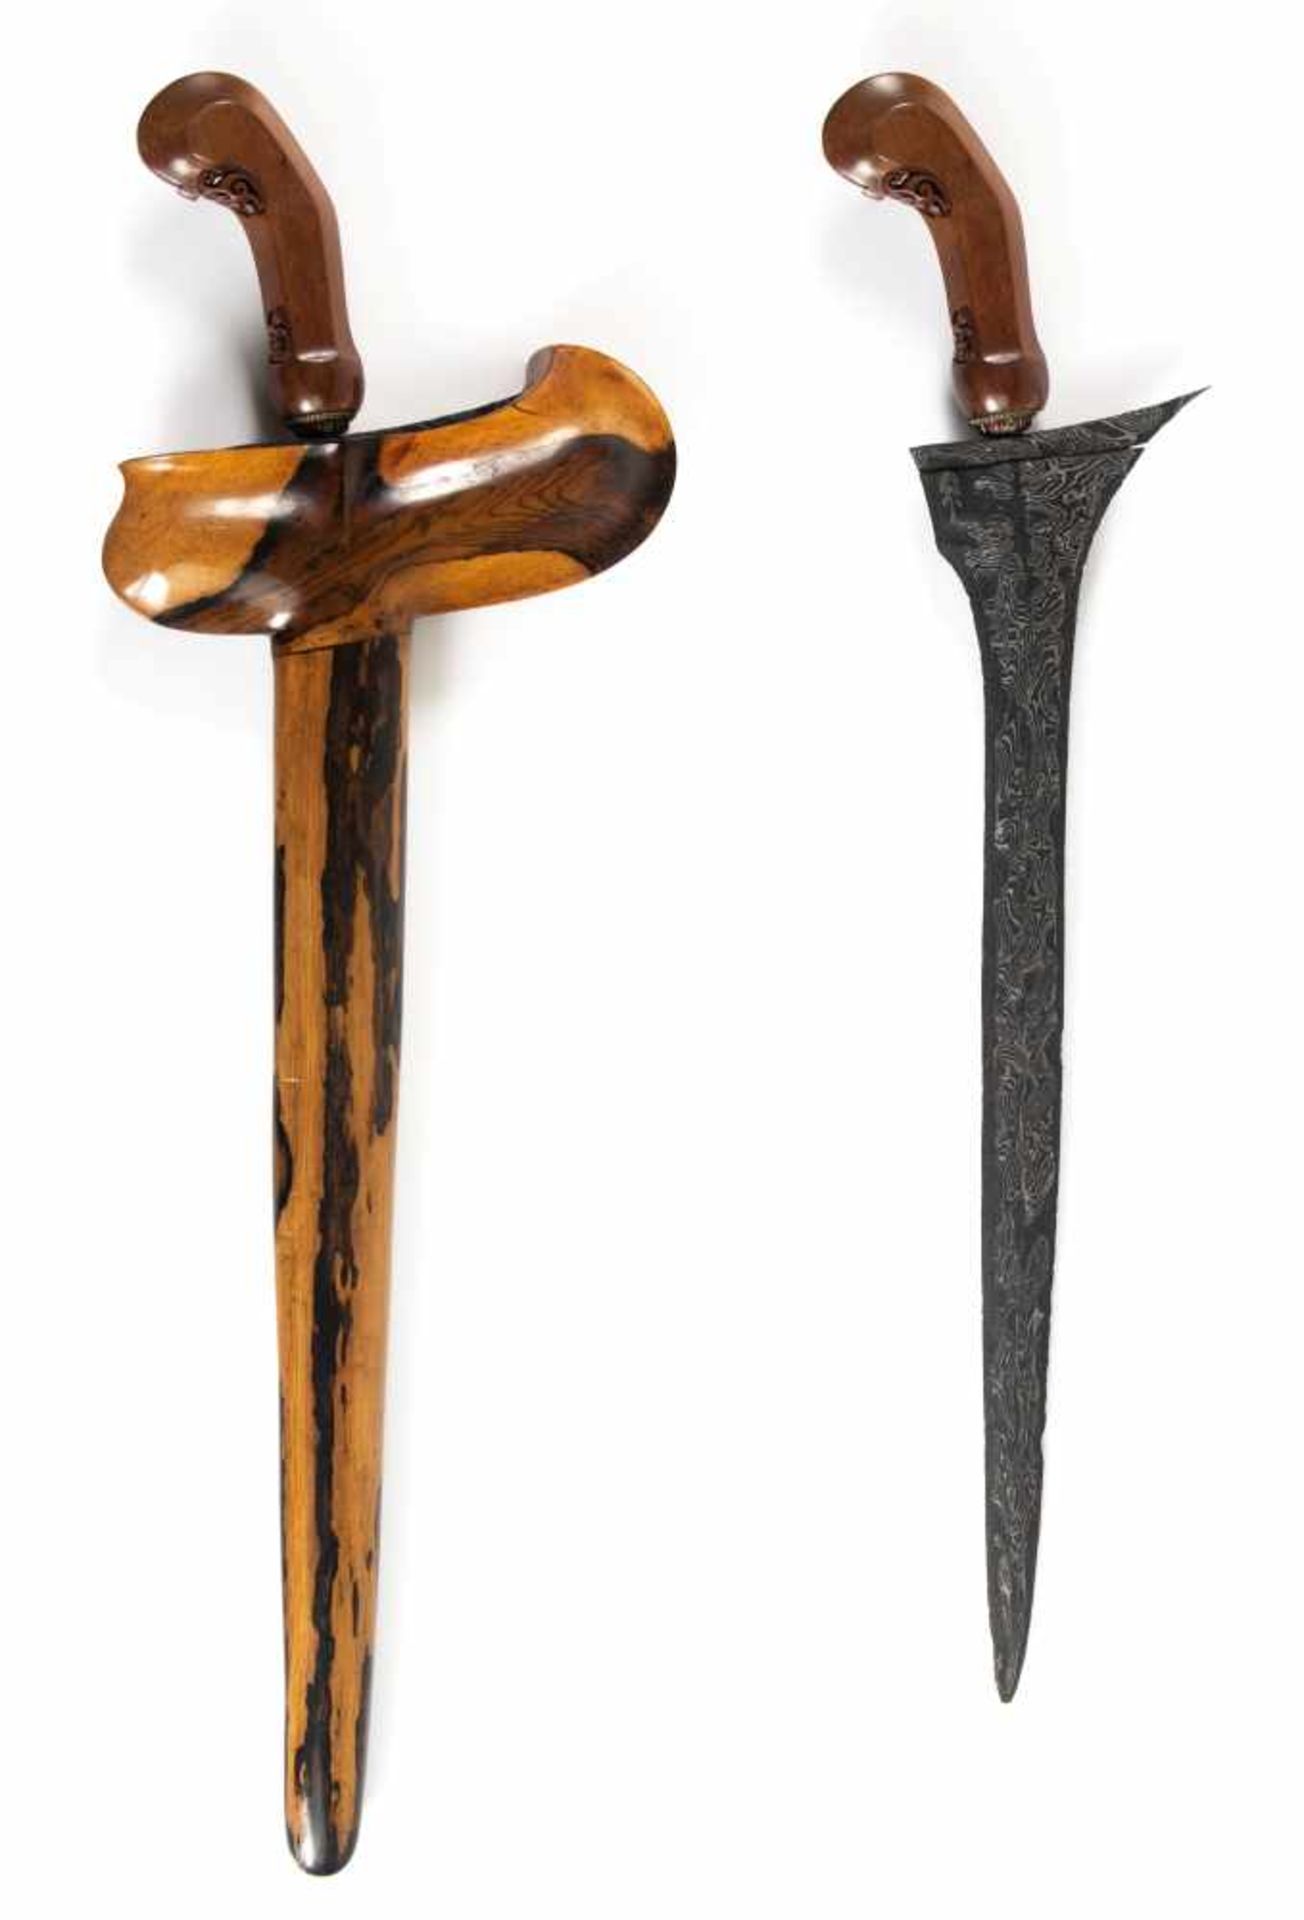 A Javanese Keris Solo, with 19th century blade.Javanese Keris Solo, with 19th century blade.Asal (